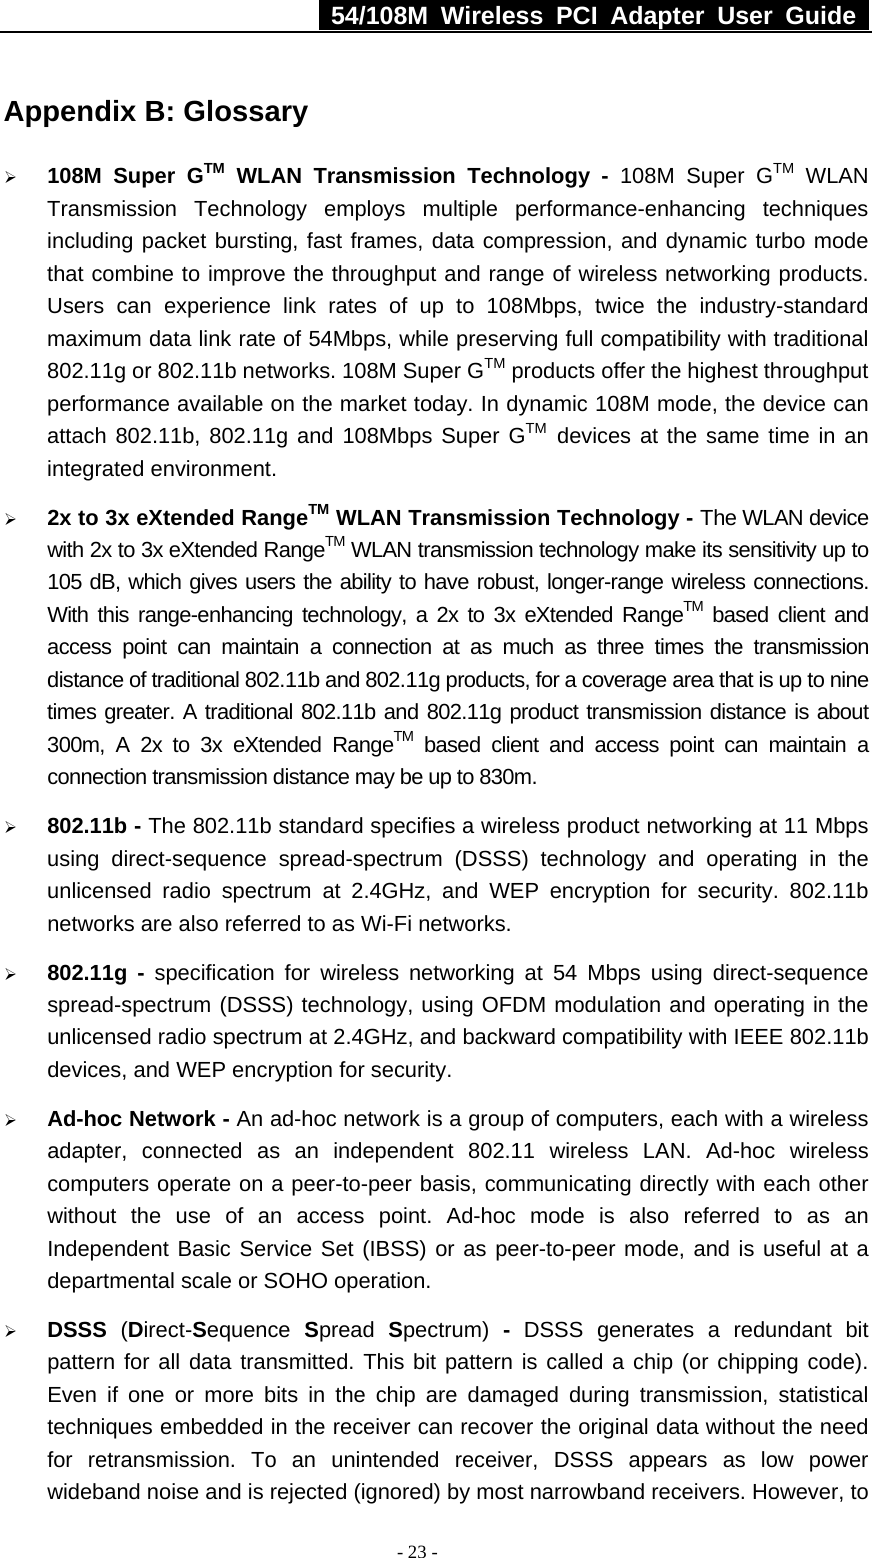   54/108M Wireless PCI Adapter User Guide  - 23 - Appendix B: Glossary ¾ 108M Super GTM WLAN Transmission Technology - 108M Super GTM WLAN Transmission Technology employs multiple performance-enhancing techniques including packet bursting, fast frames, data compression, and dynamic turbo mode that combine to improve the throughput and range of wireless networking products. Users can experience link rates of up to 108Mbps, twice the industry-standard maximum data link rate of 54Mbps, while preserving full compatibility with traditional 802.11g or 802.11b networks. 108M Super GTM products offer the highest throughput performance available on the market today. In dynamic 108M mode, the device can attach 802.11b, 802.11g and 108Mbps Super GTM devices at the same time in an integrated environment. ¾ 2x to 3x eXtended RangeTM WLAN Transmission Technology - The WLAN device with 2x to 3x eXtended RangeTM WLAN transmission technology make its sensitivity up to 105 dB, which gives users the ability to have robust, longer-range wireless connections. With this range-enhancing technology, a 2x to 3x eXtended RangeTM based client and access point can maintain a connection at as much as three times the transmission distance of traditional 802.11b and 802.11g products, for a coverage area that is up to nine times greater. A traditional 802.11b and 802.11g product transmission distance is about 300m, A 2x to 3x eXtended RangeTM based client and access point can maintain a connection transmission distance may be up to 830m. ¾ 802.11b - The 802.11b standard specifies a wireless product networking at 11 Mbps using direct-sequence spread-spectrum (DSSS) technology and operating in the unlicensed radio spectrum at 2.4GHz, and WEP encryption for security. 802.11b networks are also referred to as Wi-Fi networks. ¾ 802.11g - specification for wireless networking at 54 Mbps using direct-sequence spread-spectrum (DSSS) technology, using OFDM modulation and operating in the unlicensed radio spectrum at 2.4GHz, and backward compatibility with IEEE 802.11b devices, and WEP encryption for security. ¾ Ad-hoc Network - An ad-hoc network is a group of computers, each with a wireless adapter, connected as an independent 802.11 wireless LAN. Ad-hoc wireless computers operate on a peer-to-peer basis, communicating directly with each other without the use of an access point. Ad-hoc mode is also referred to as an Independent Basic Service Set (IBSS) or as peer-to-peer mode, and is useful at a departmental scale or SOHO operation.   ¾ DSSS  (Direct-Sequence  Spread  Spectrum)  - DSSS generates a redundant bit pattern for all data transmitted. This bit pattern is called a chip (or chipping code). Even if one or more bits in the chip are damaged during transmission, statistical techniques embedded in the receiver can recover the original data without the need for retransmission. To an unintended receiver, DSSS appears as low power wideband noise and is rejected (ignored) by most narrowband receivers. However, to 